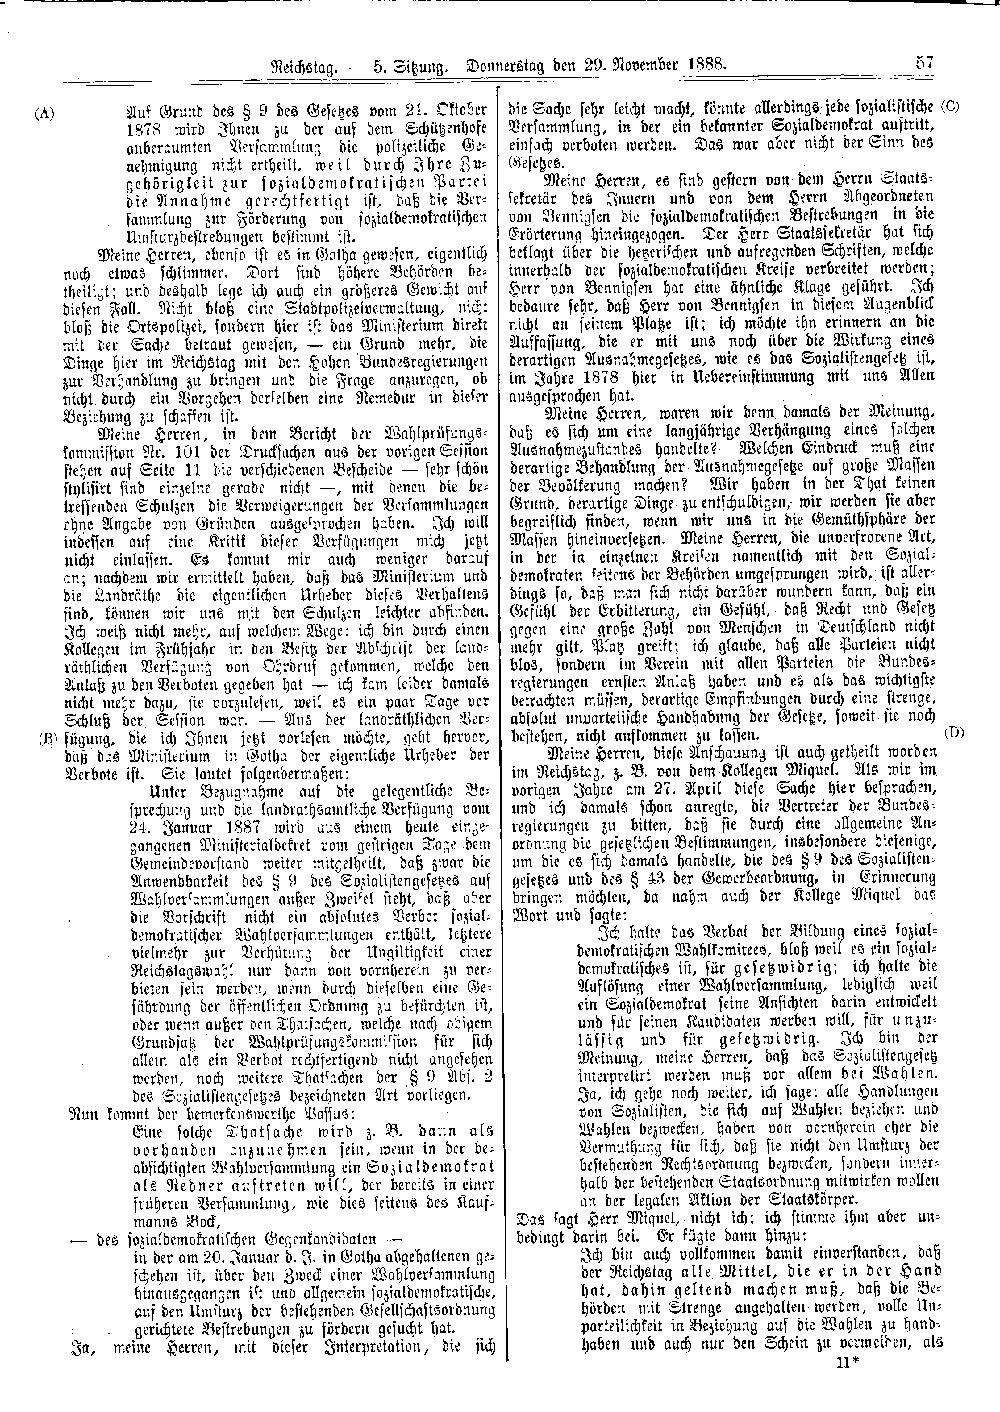 Scan of page 57